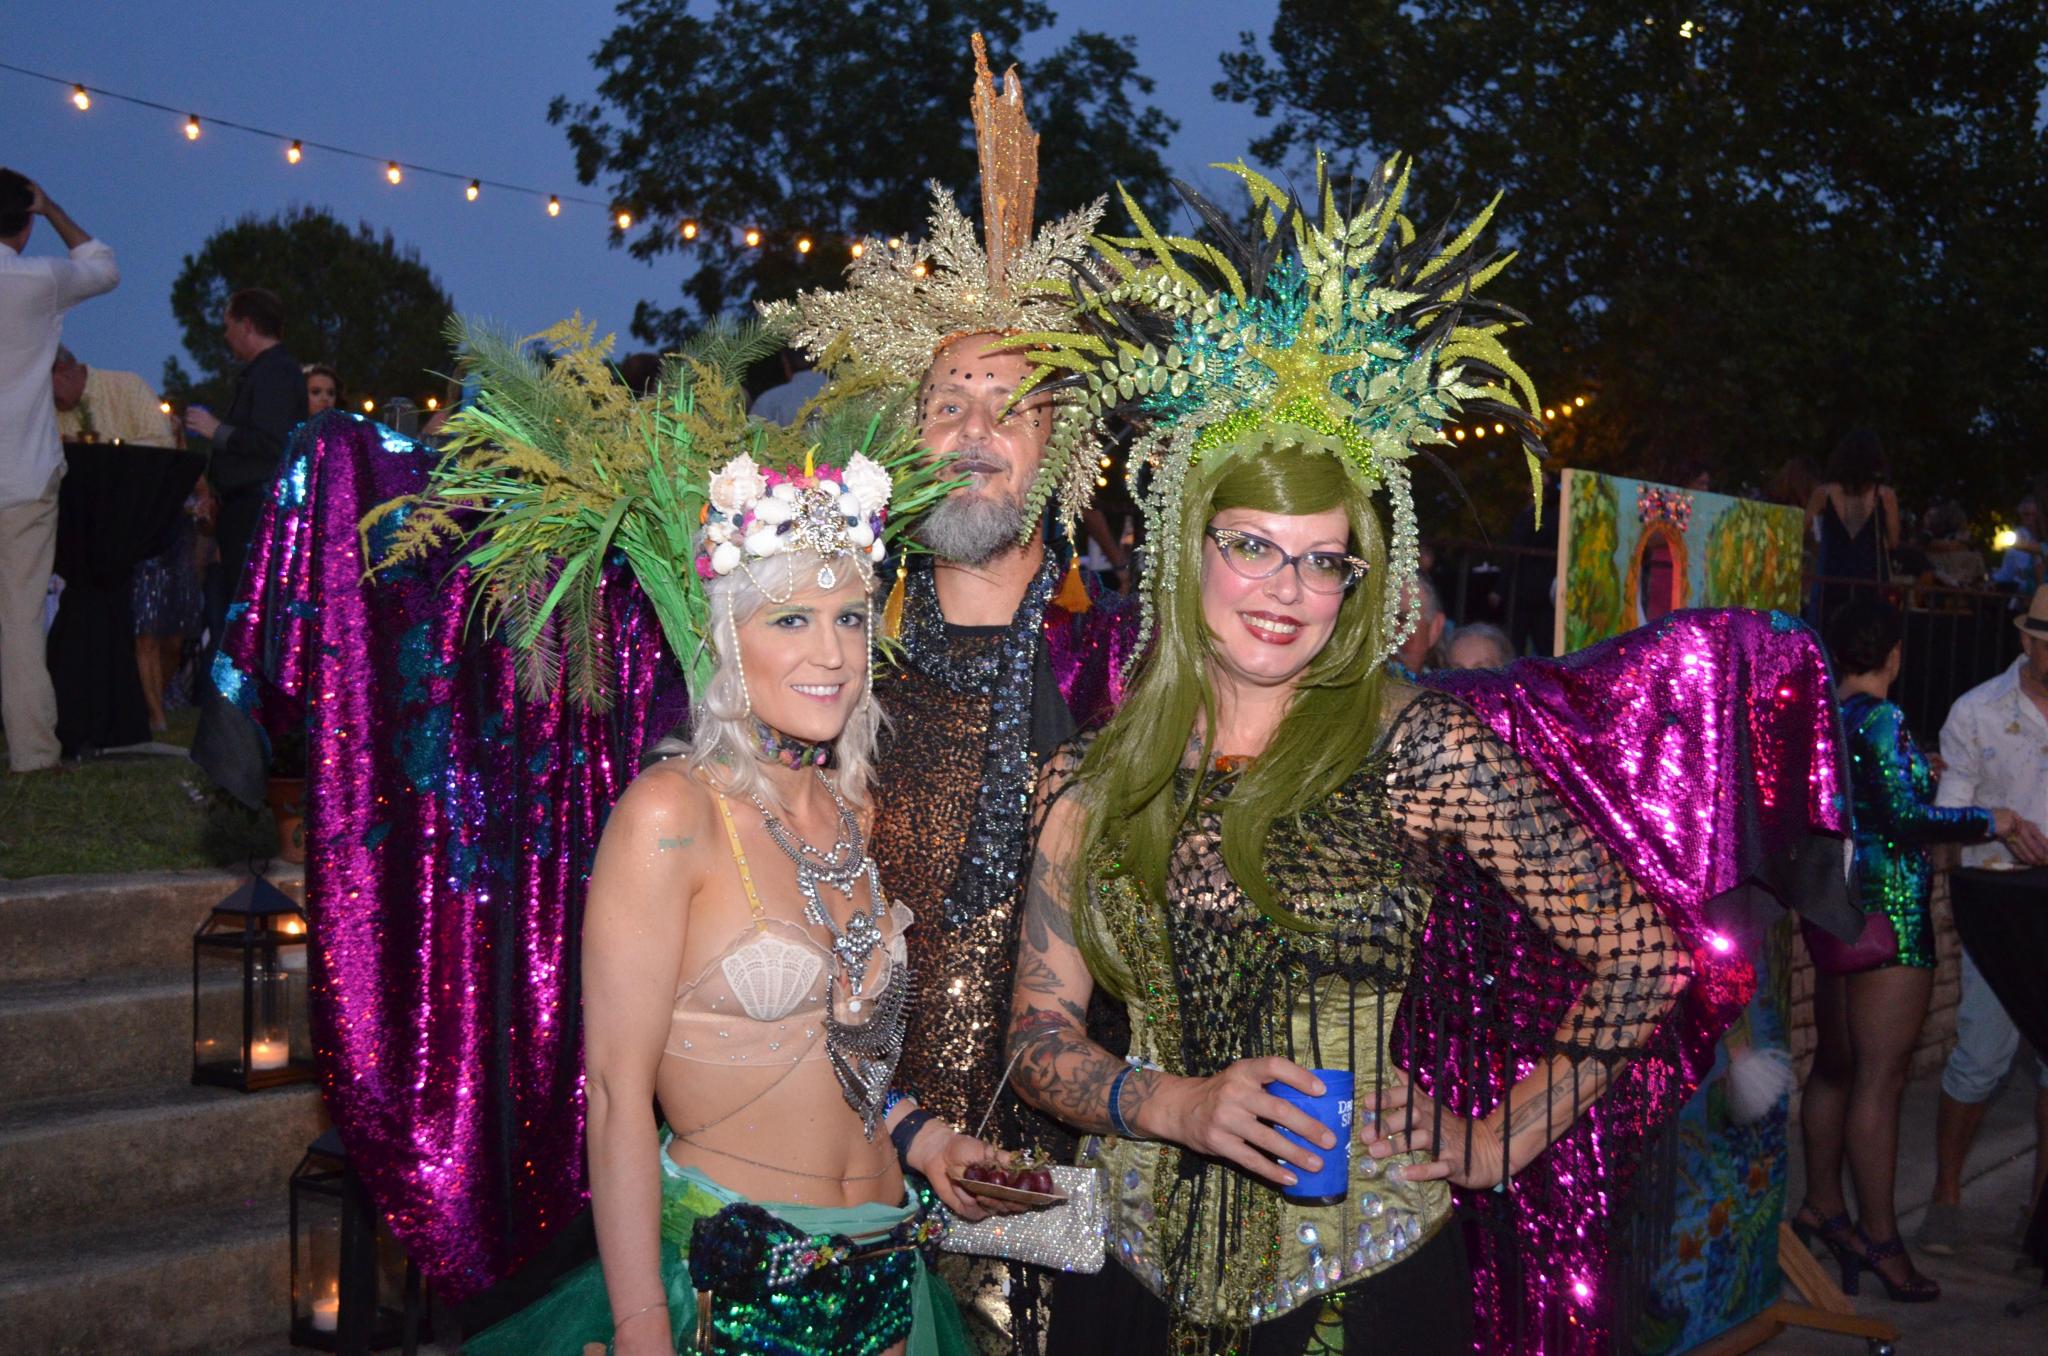 Brie Lee, Lee Wallace and Katinka Pinka sporting their mermaid couture.